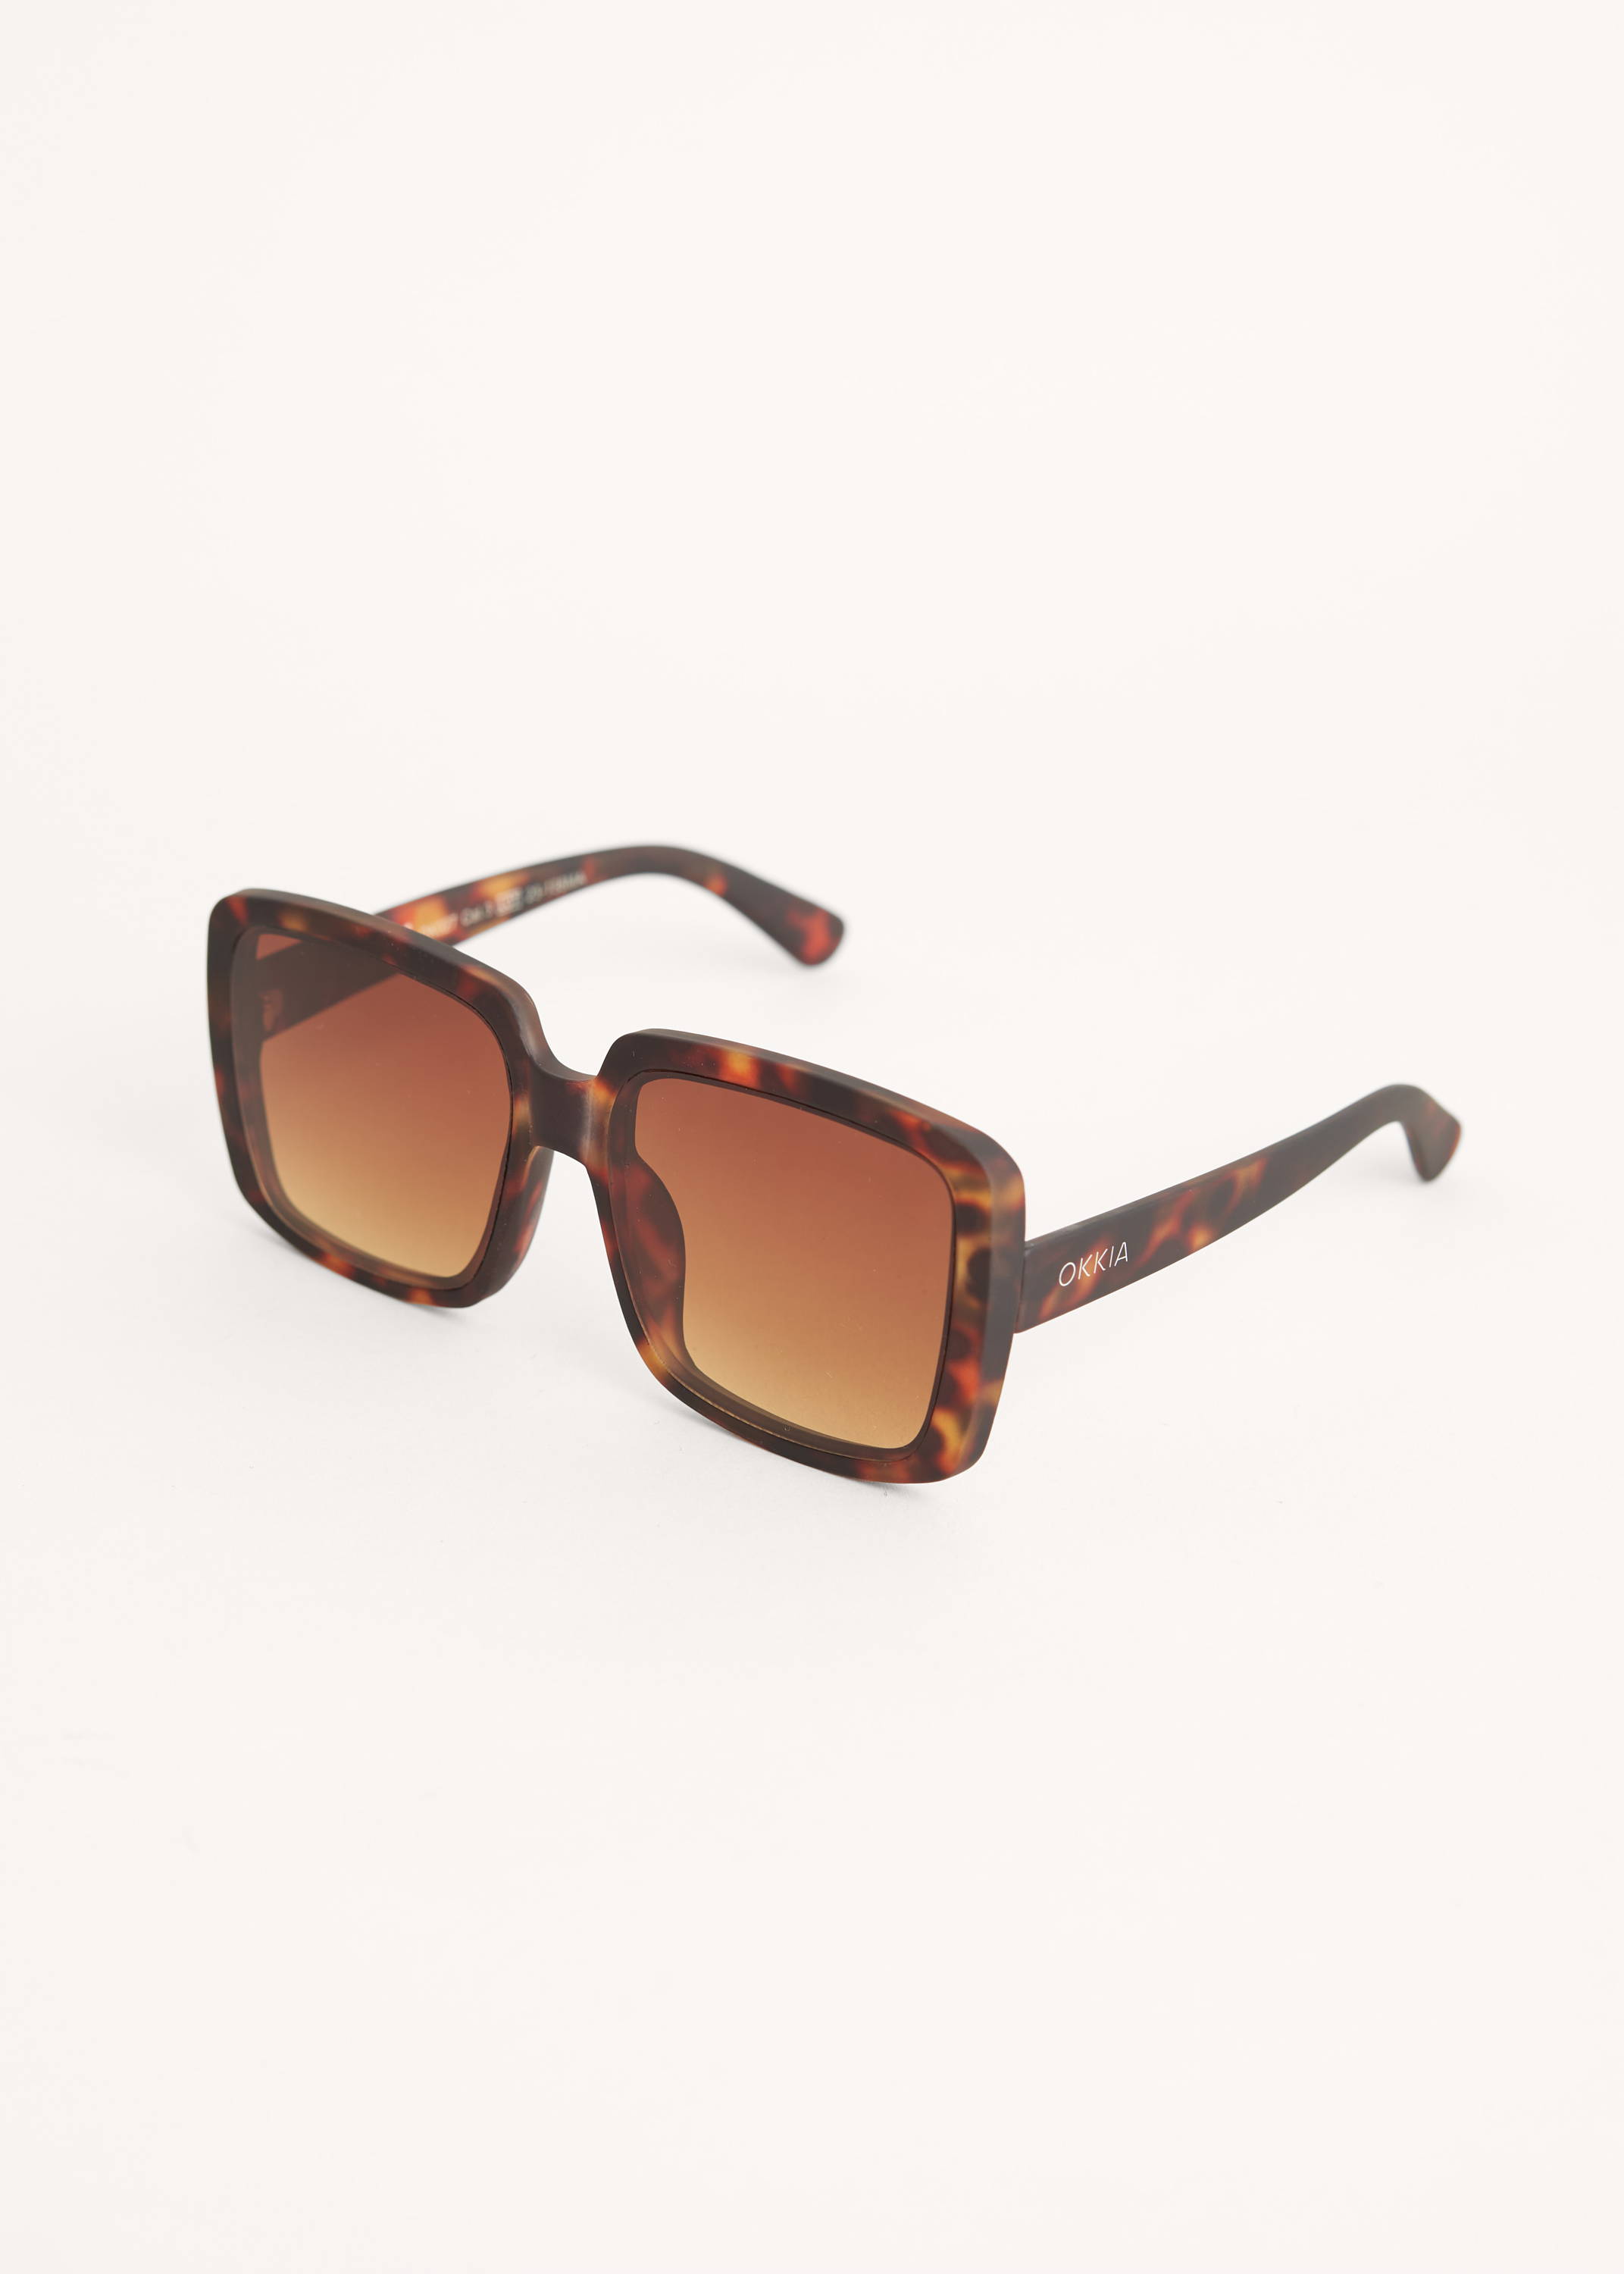 A pair of rectangular tortoiseshell 70s style sunglasses with brown lenses